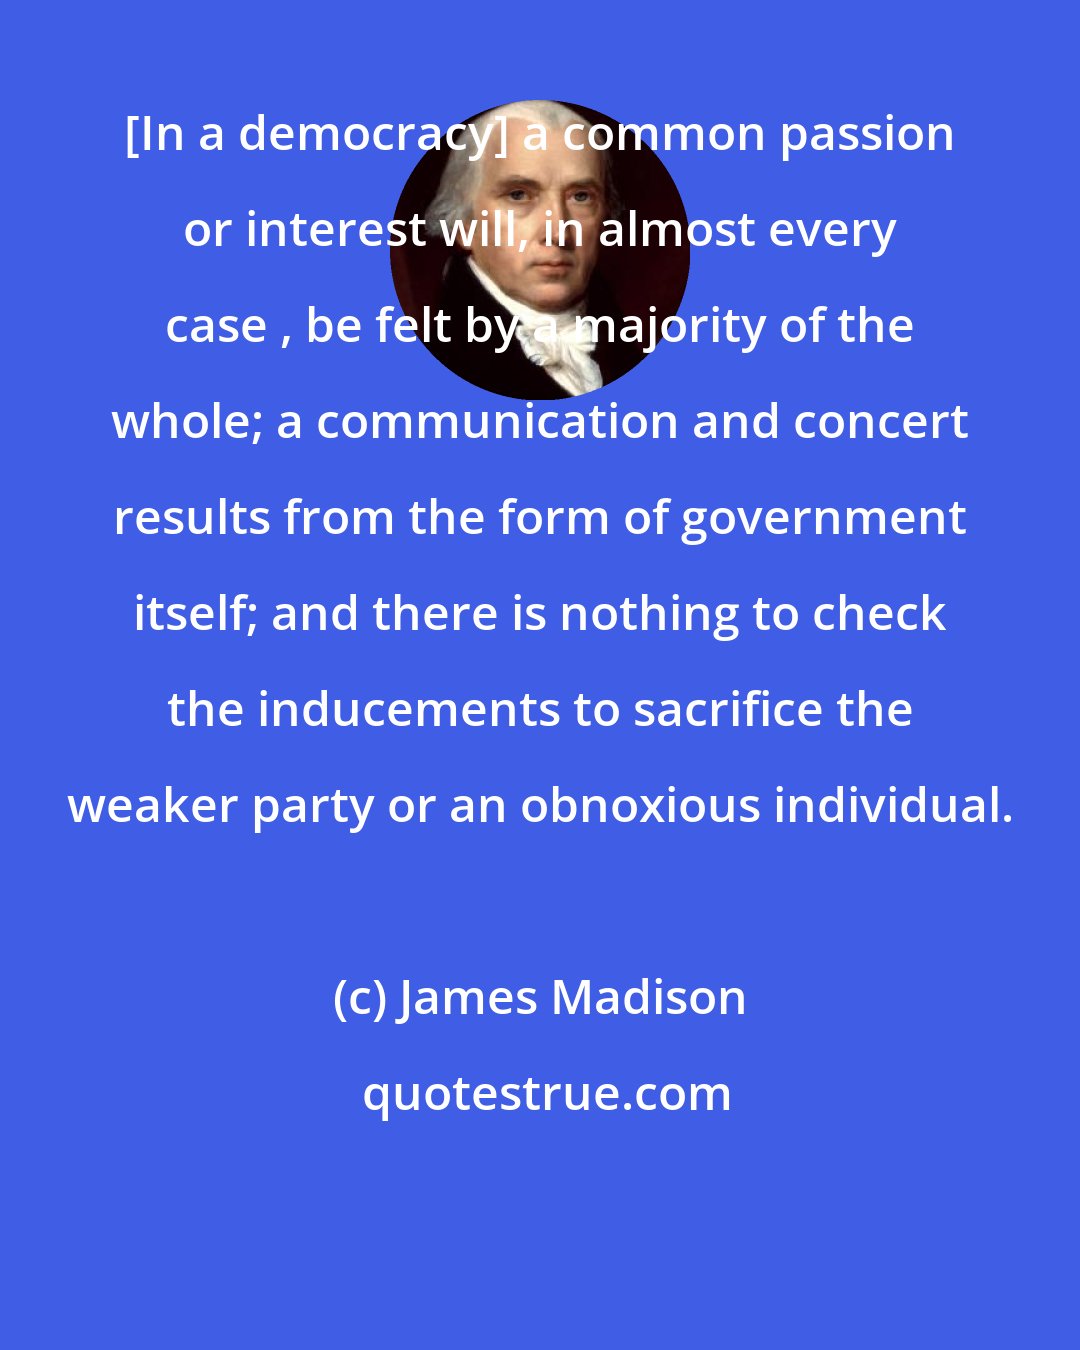 James Madison: [In a democracy] a common passion or interest will, in almost every case , be felt by a majority of the whole; a communication and concert results from the form of government itself; and there is nothing to check the inducements to sacrifice the weaker party or an obnoxious individual.